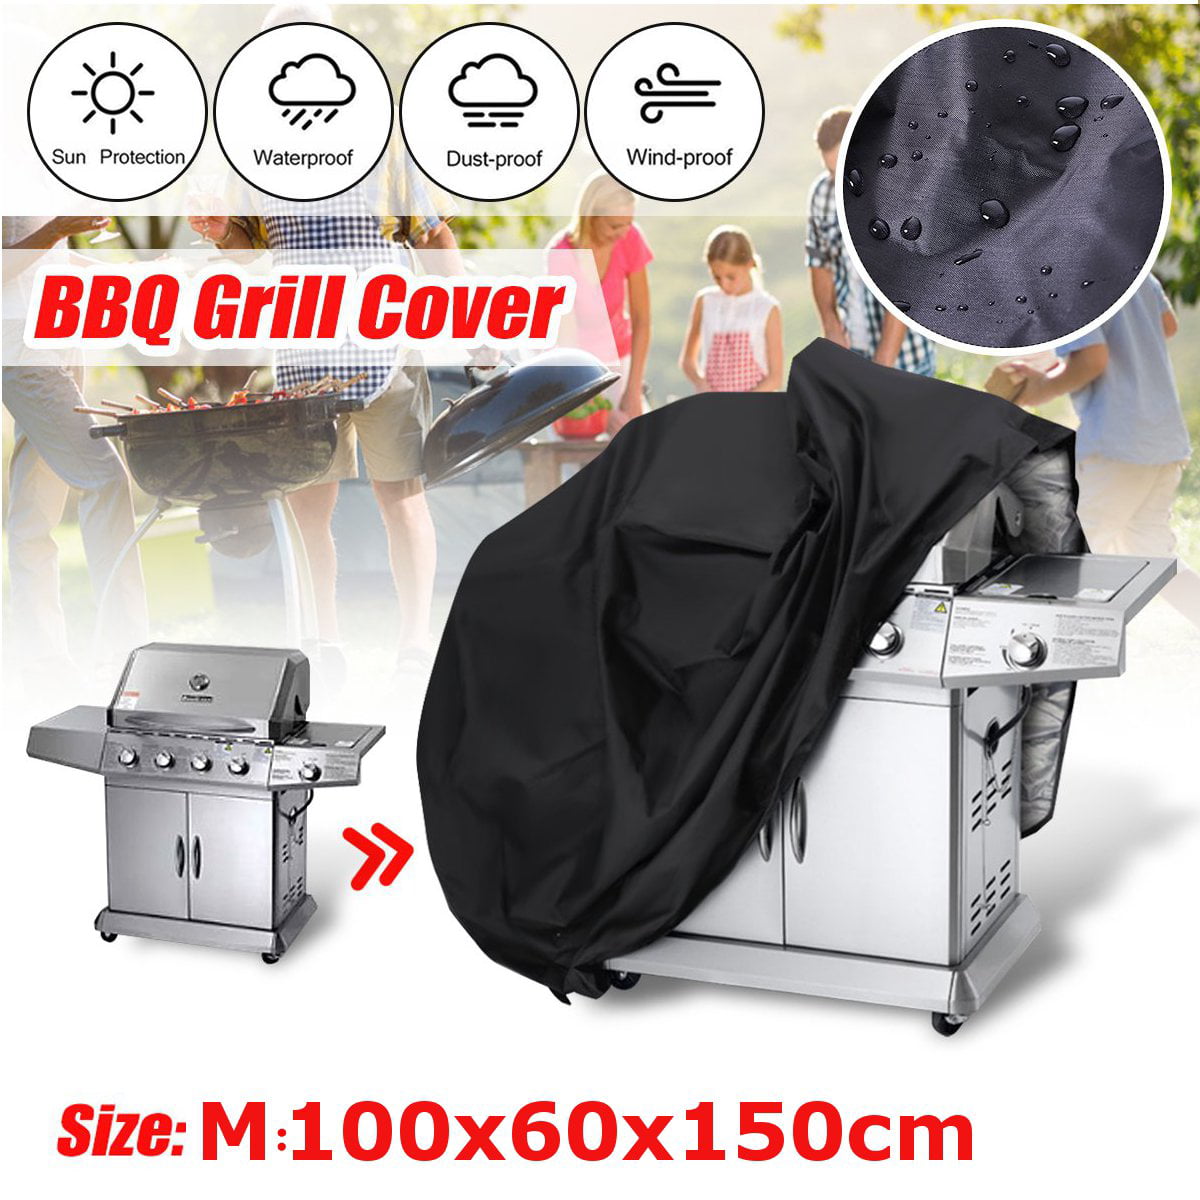 S/M/L BBQ Cover Heavy Duty Waterproof Rain Gas Barbeque Grill Garden Protector 